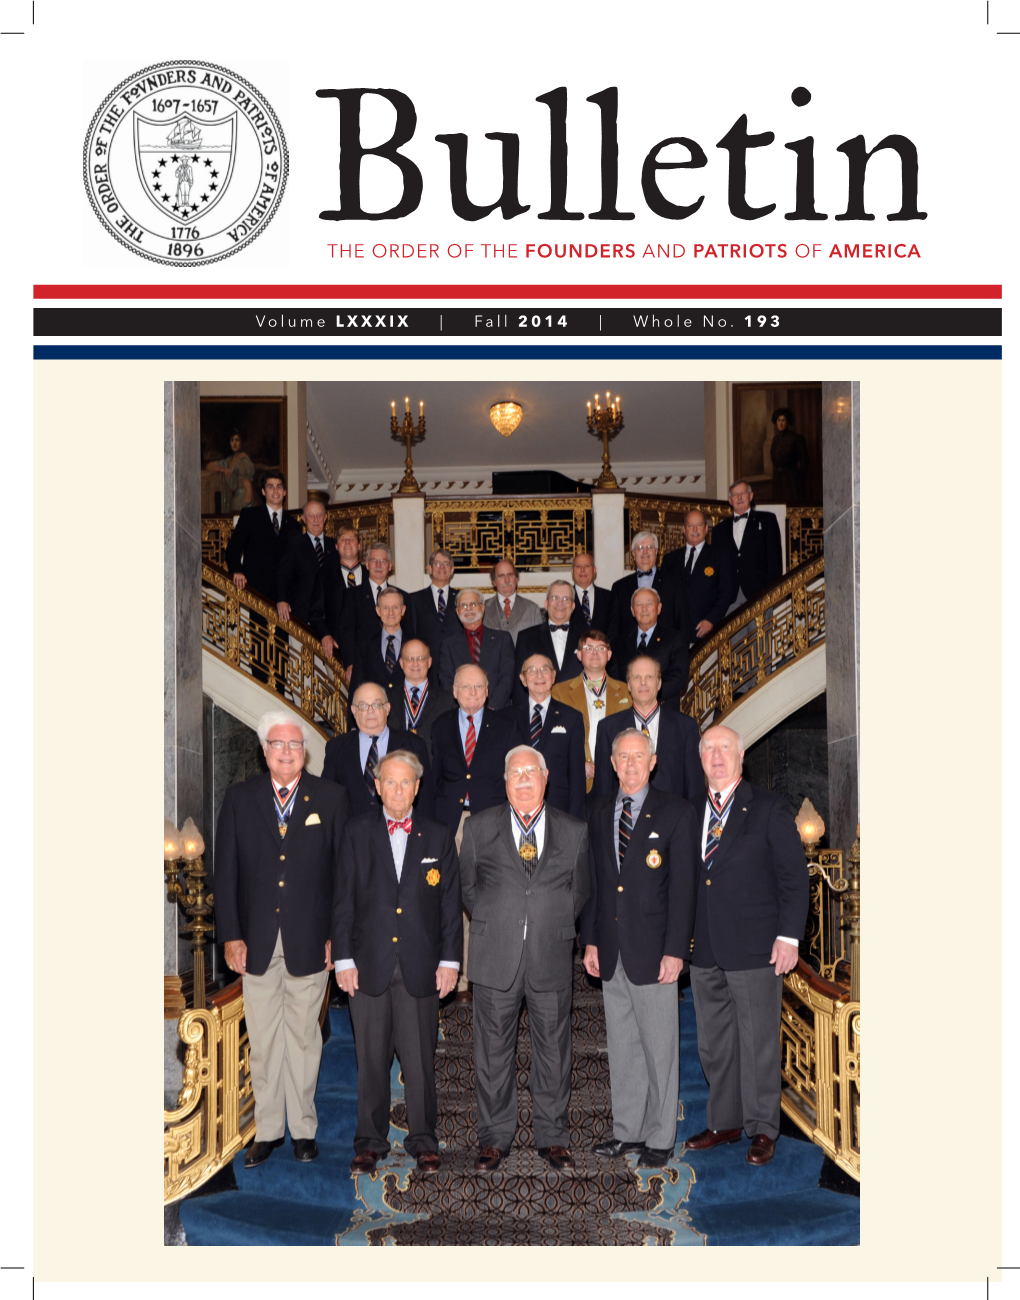 Bulletinthe Order of the Founders and Patriots of America